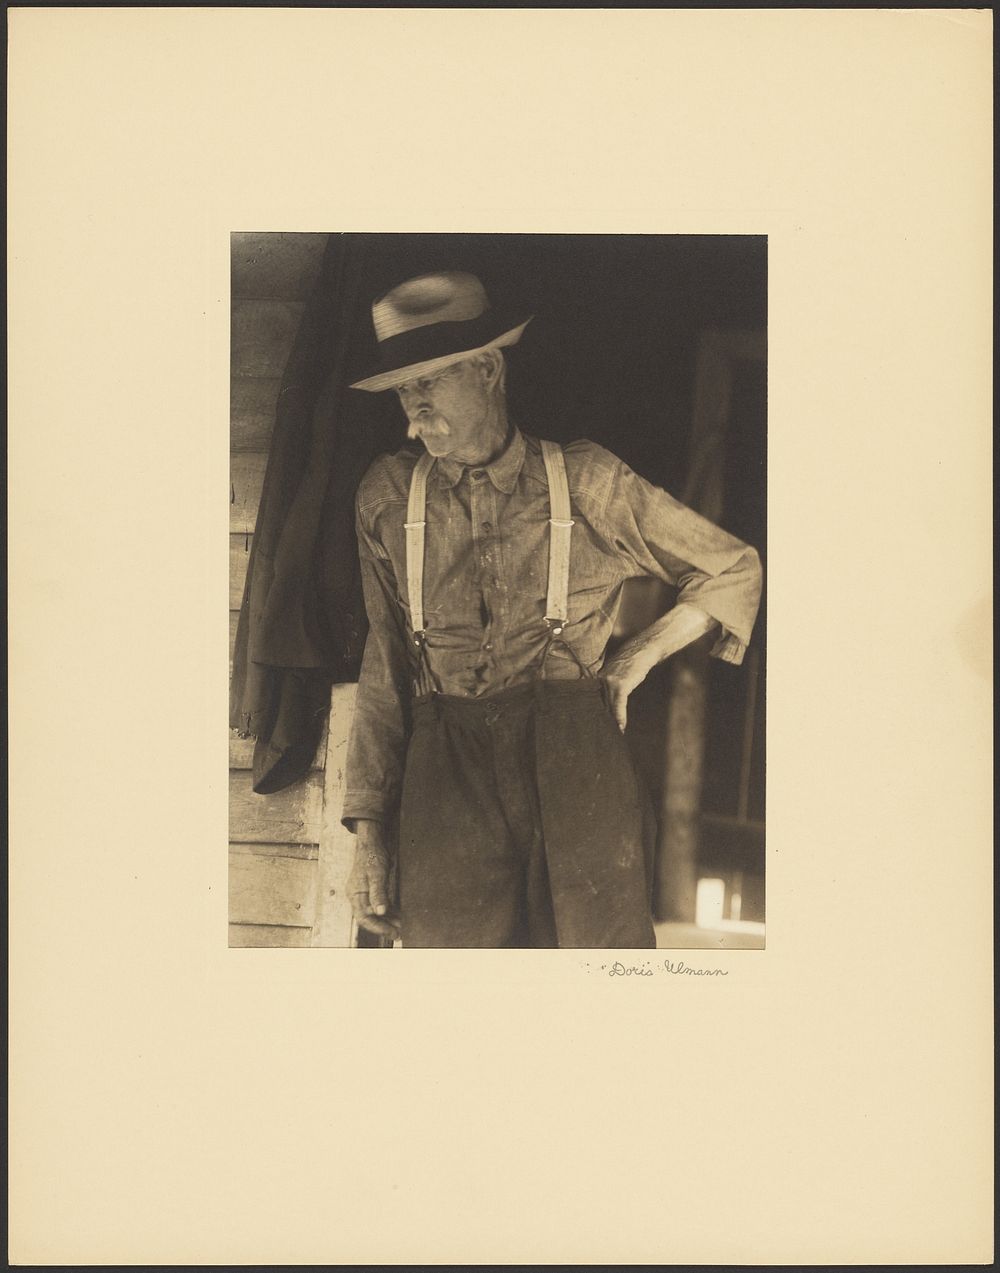 Mustached Old Man with Straw Hat and Suspenders Standing in Doorway by Doris Ulmann